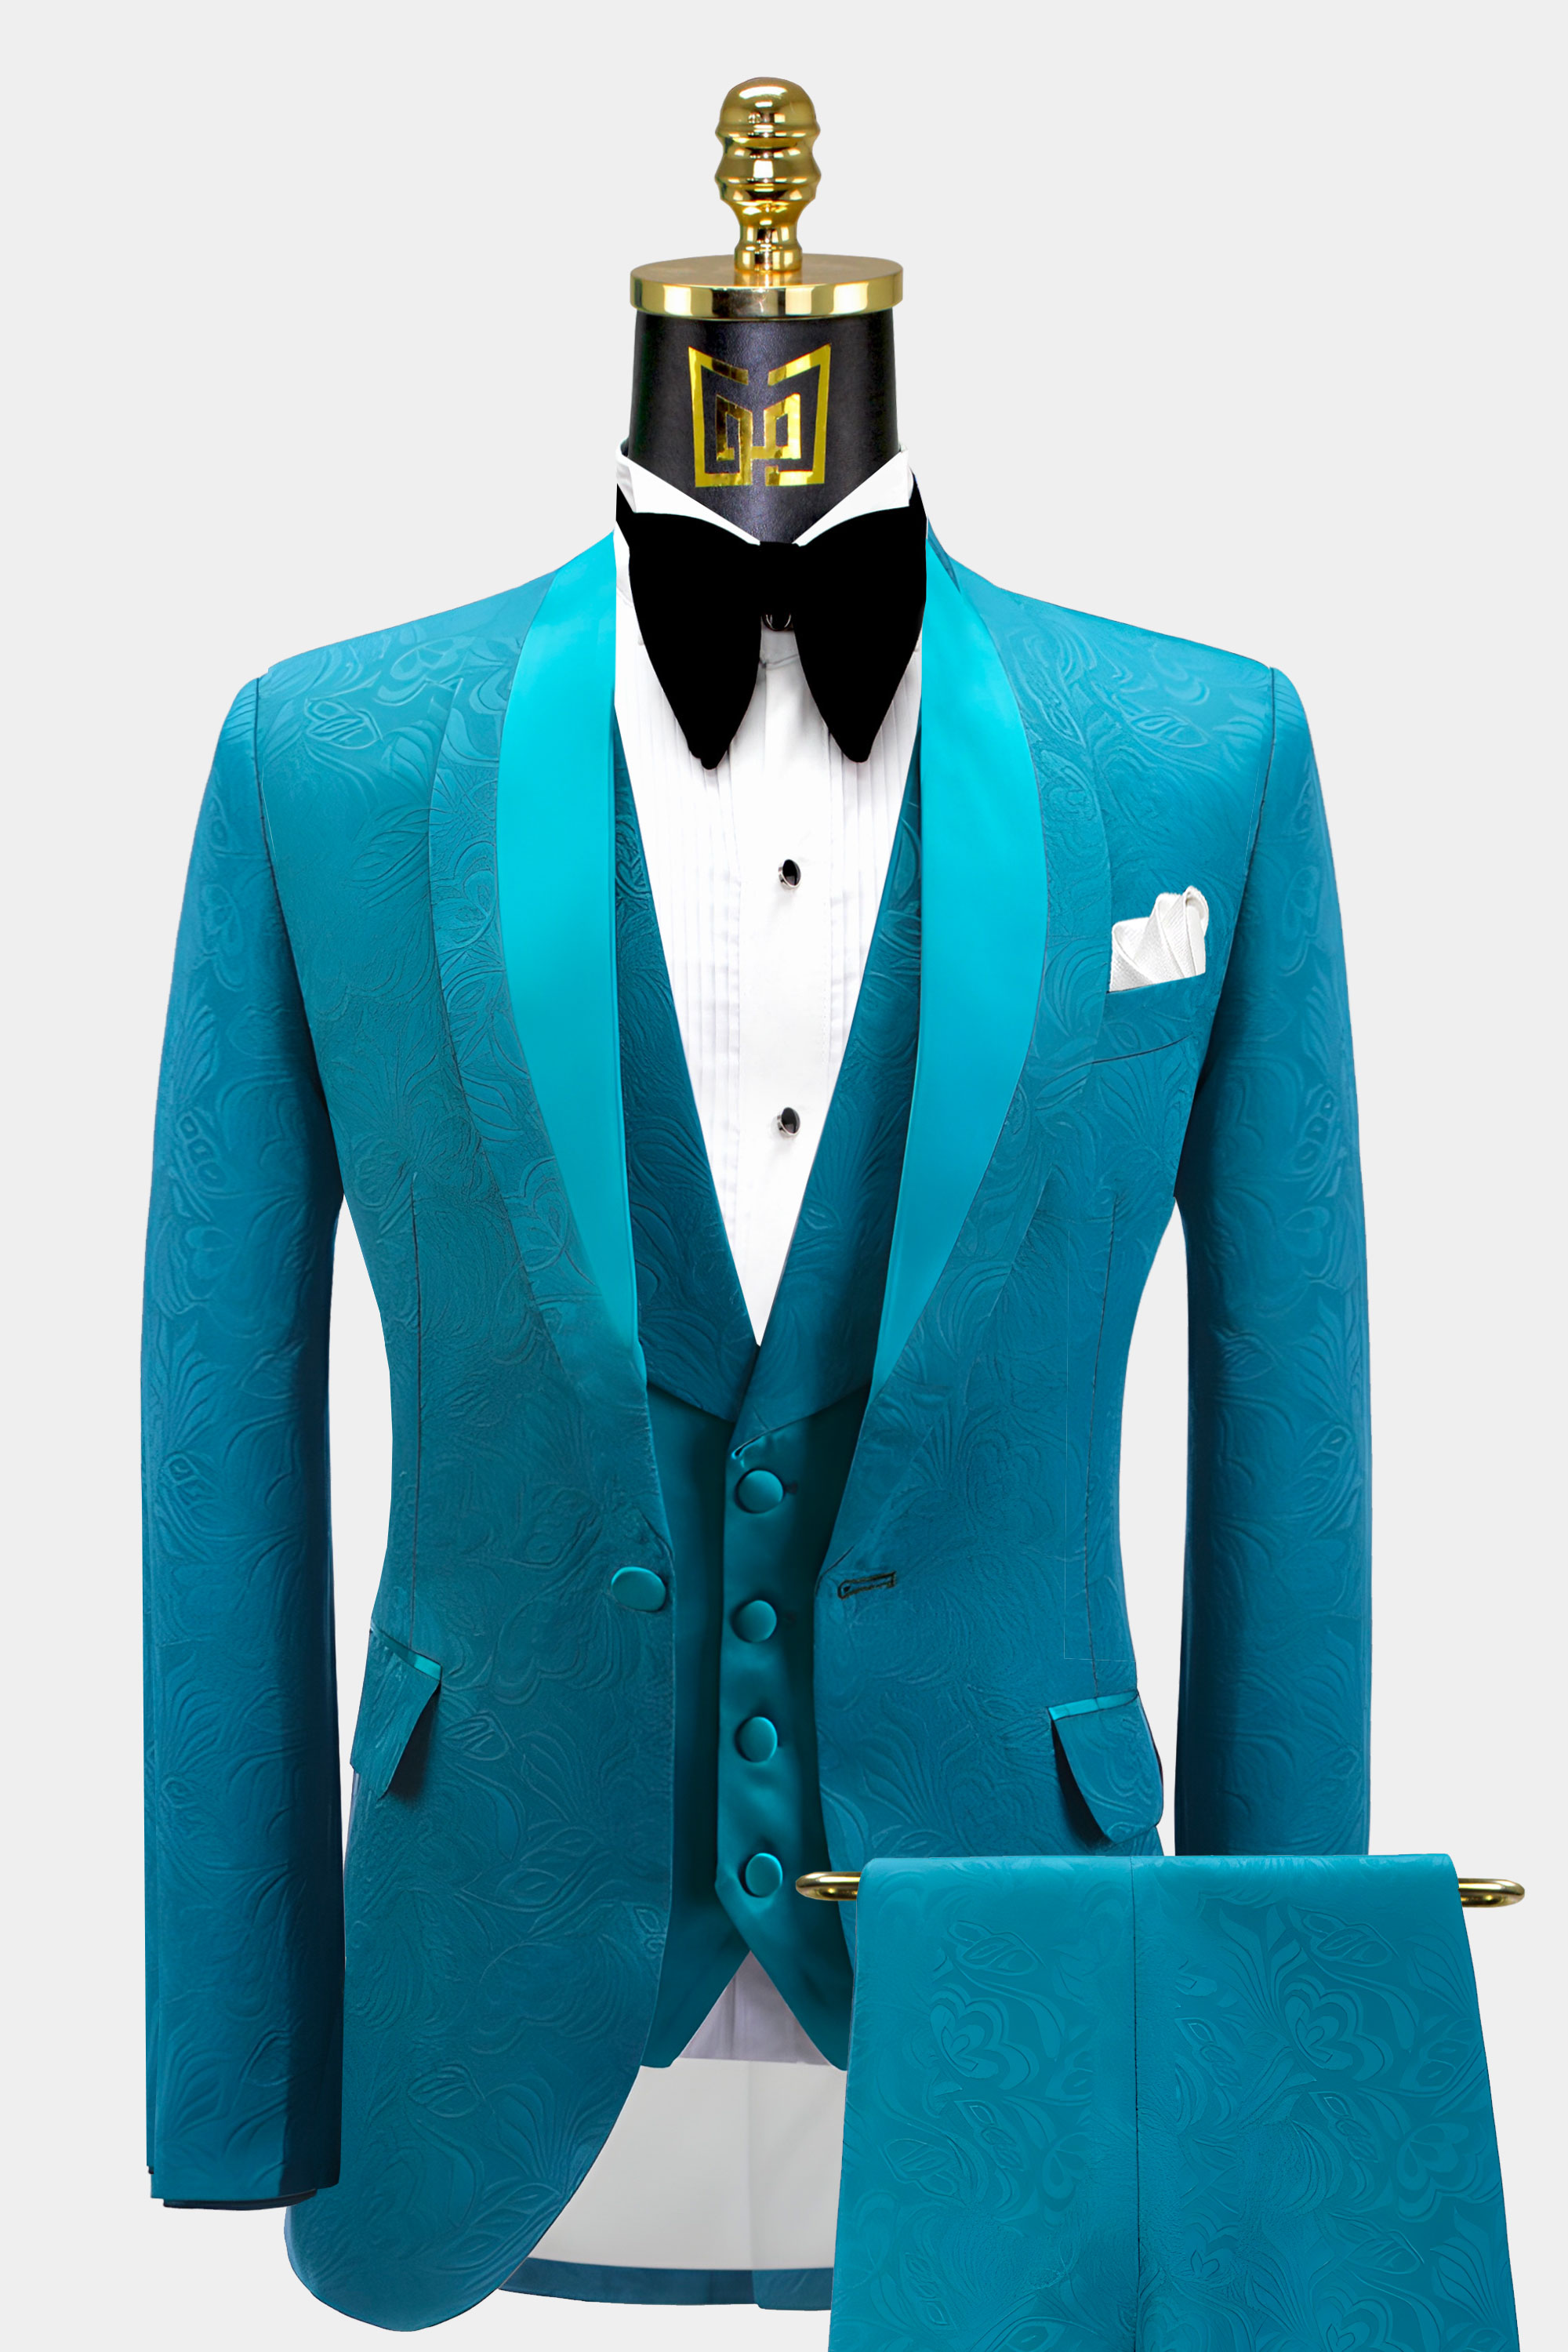 Groom Wedding Suit Turquoise Twill Wool-Mohair Wedding Suit For Men ...